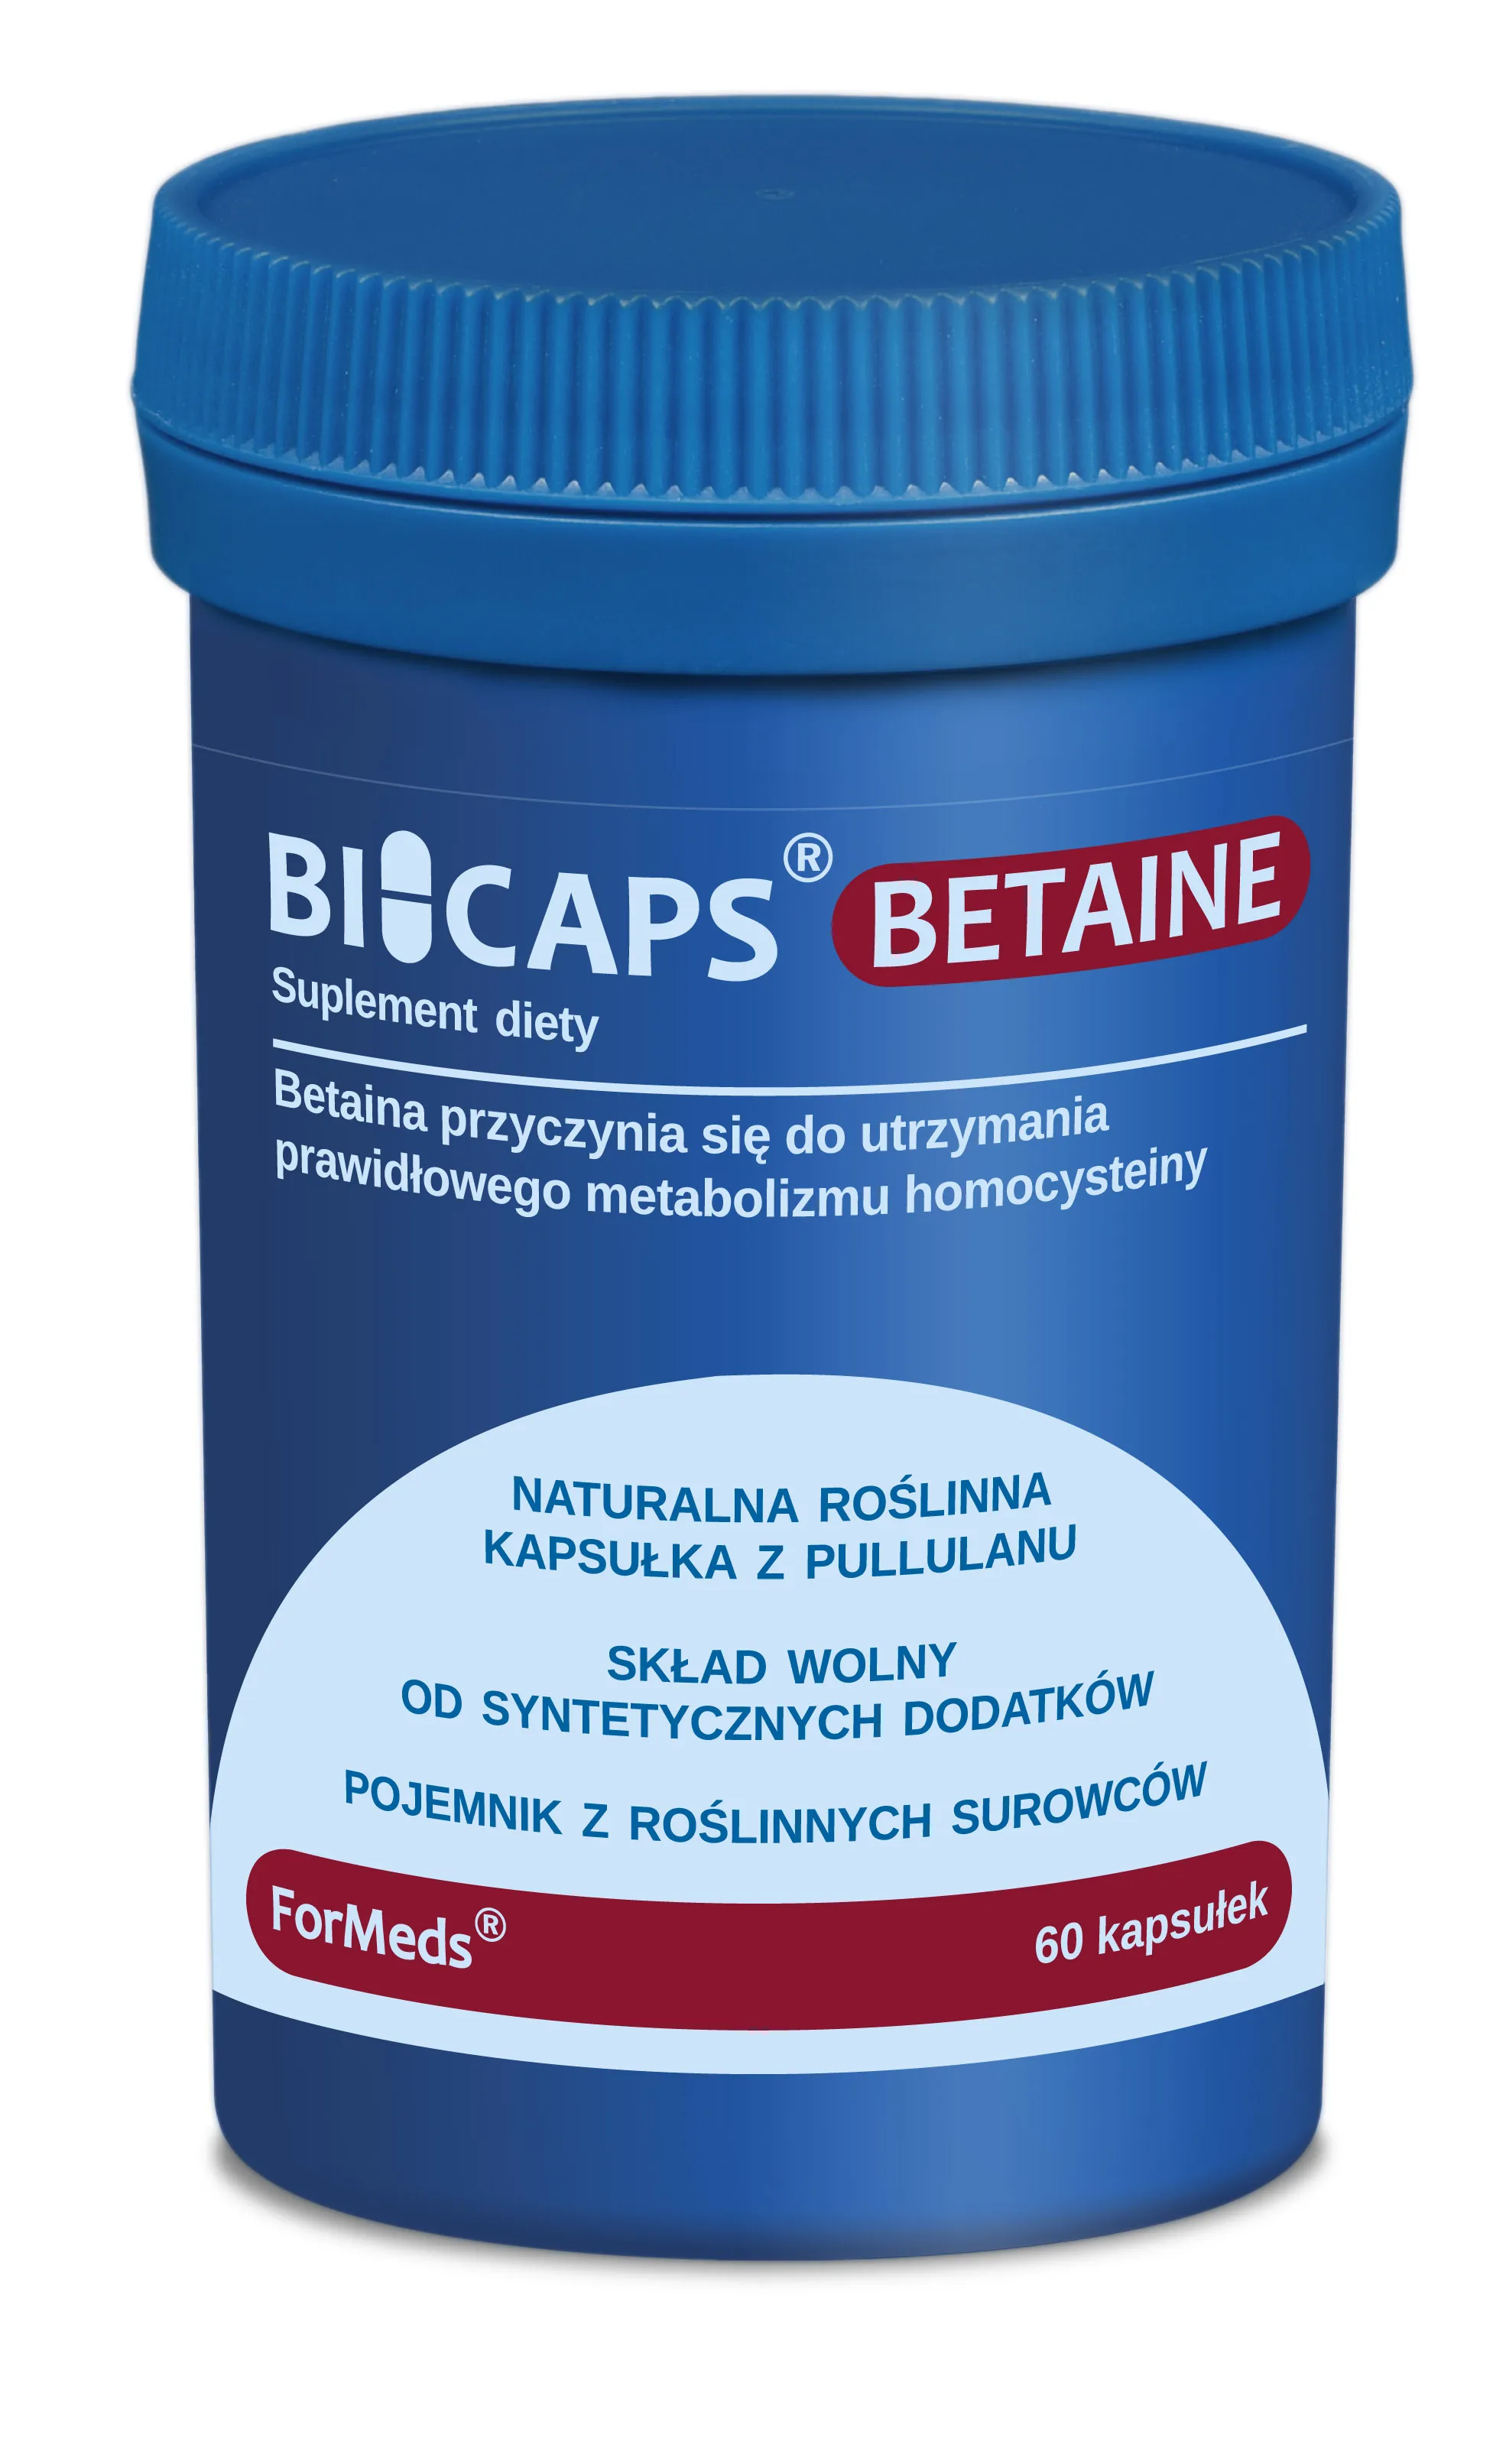 ForMeds Bicaps Betaine, suplement diety, 60 kapsułek